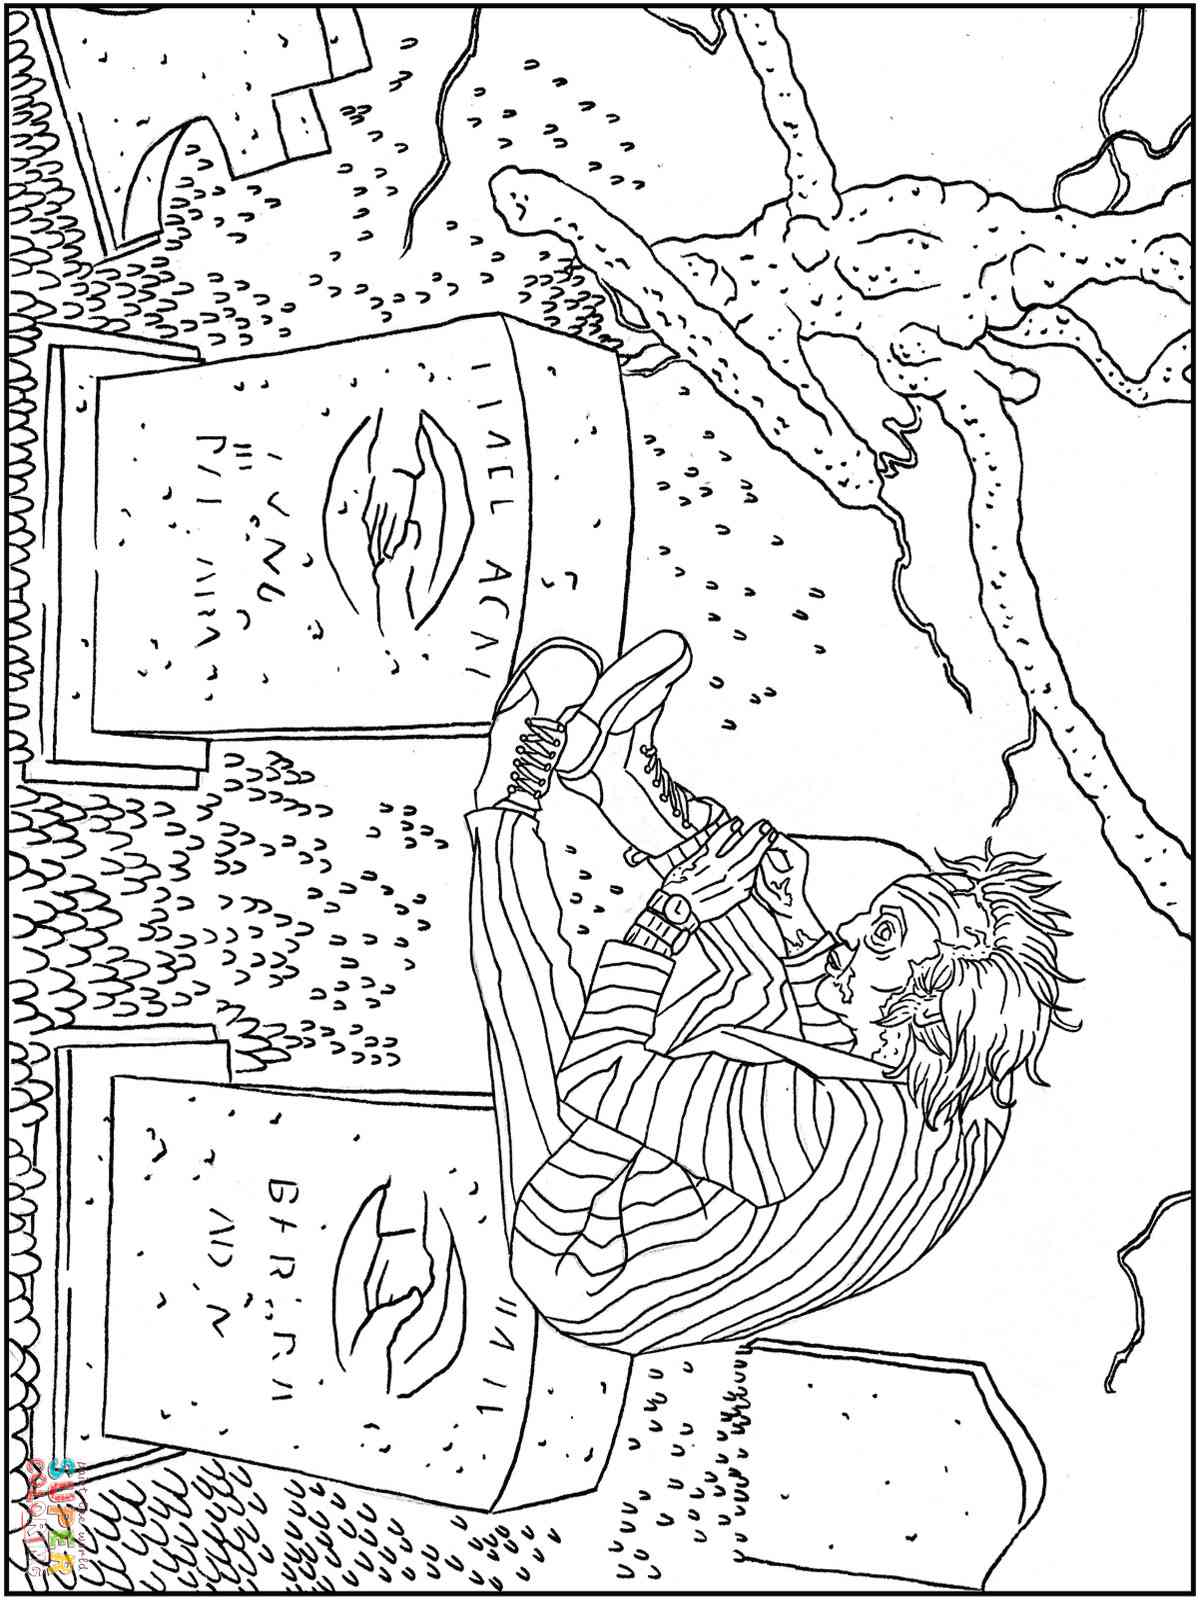 Beetlejuice sits in the cemetery coloring page